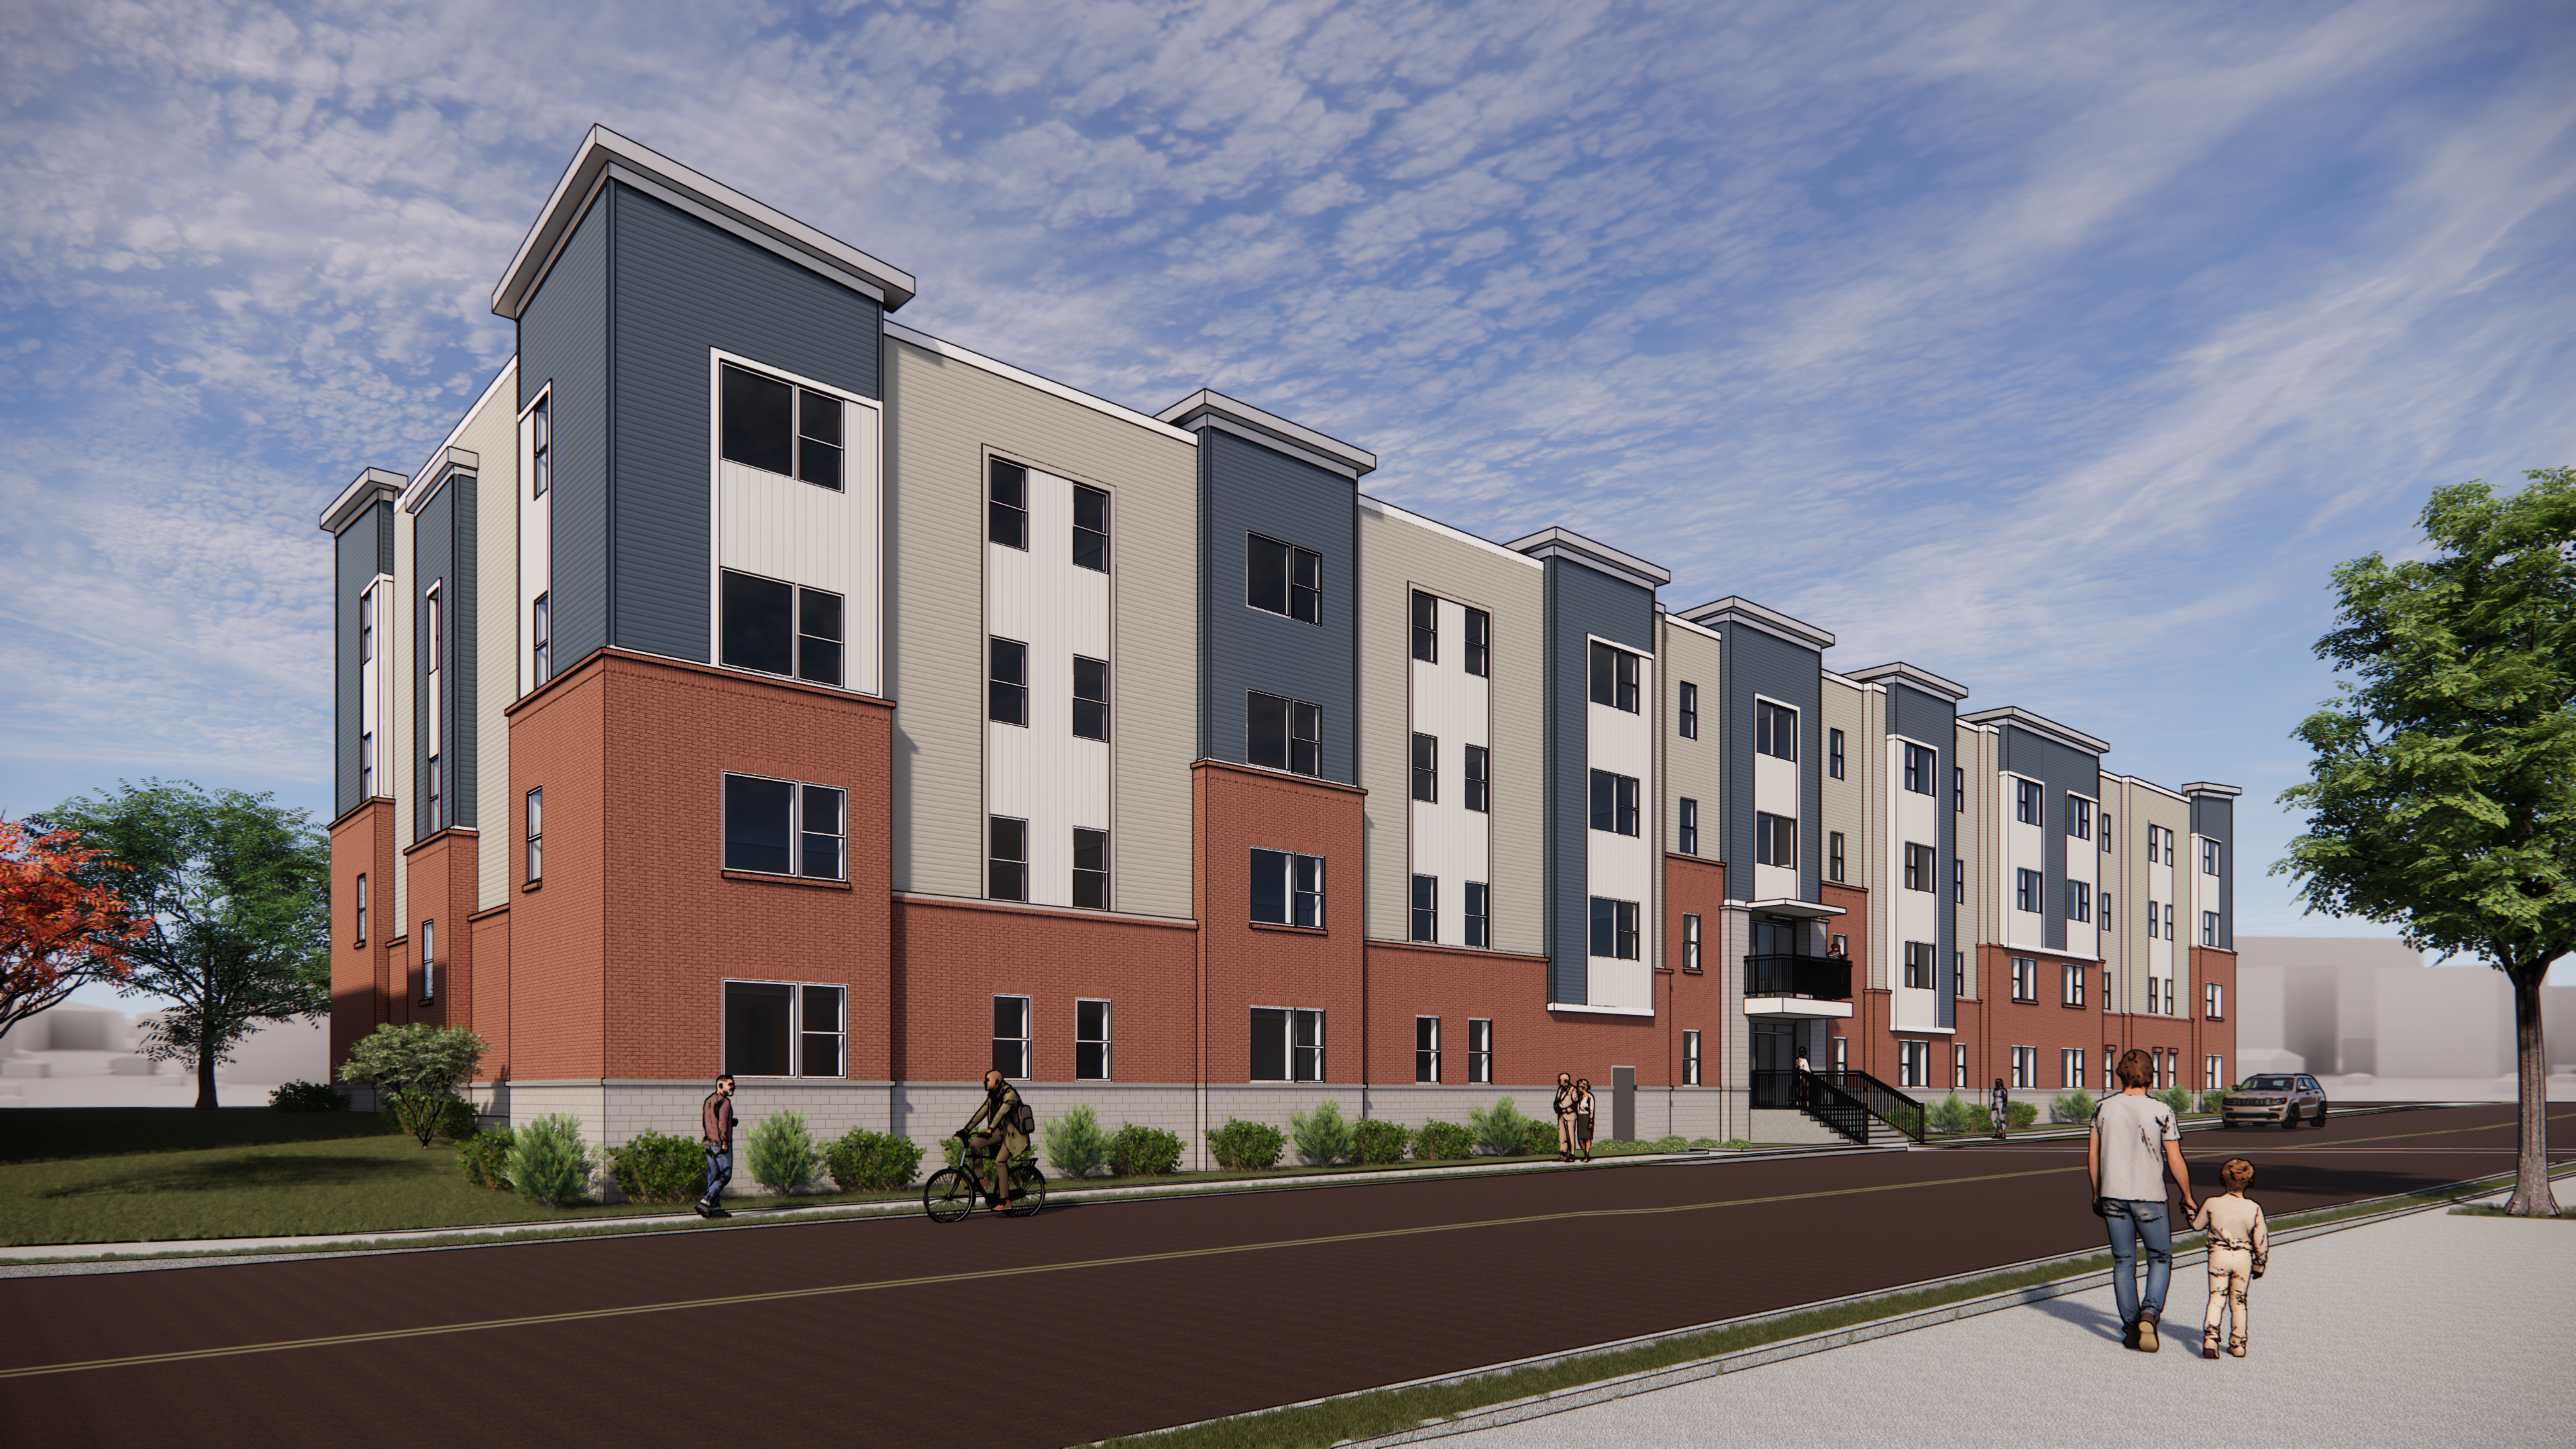 Construction begins at affordable housing community Five Points Crossing in Rocky  Mount, North Carolina - Woda Cooper Companies, Inc.